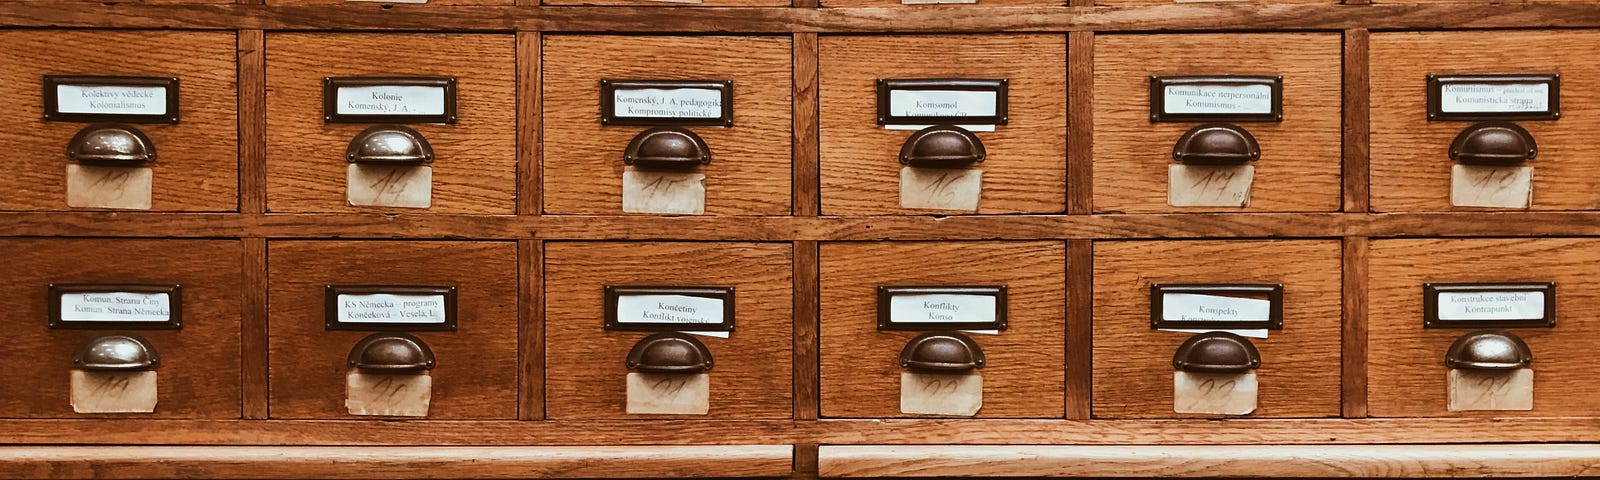 A file cabinet with small compartments of drawers